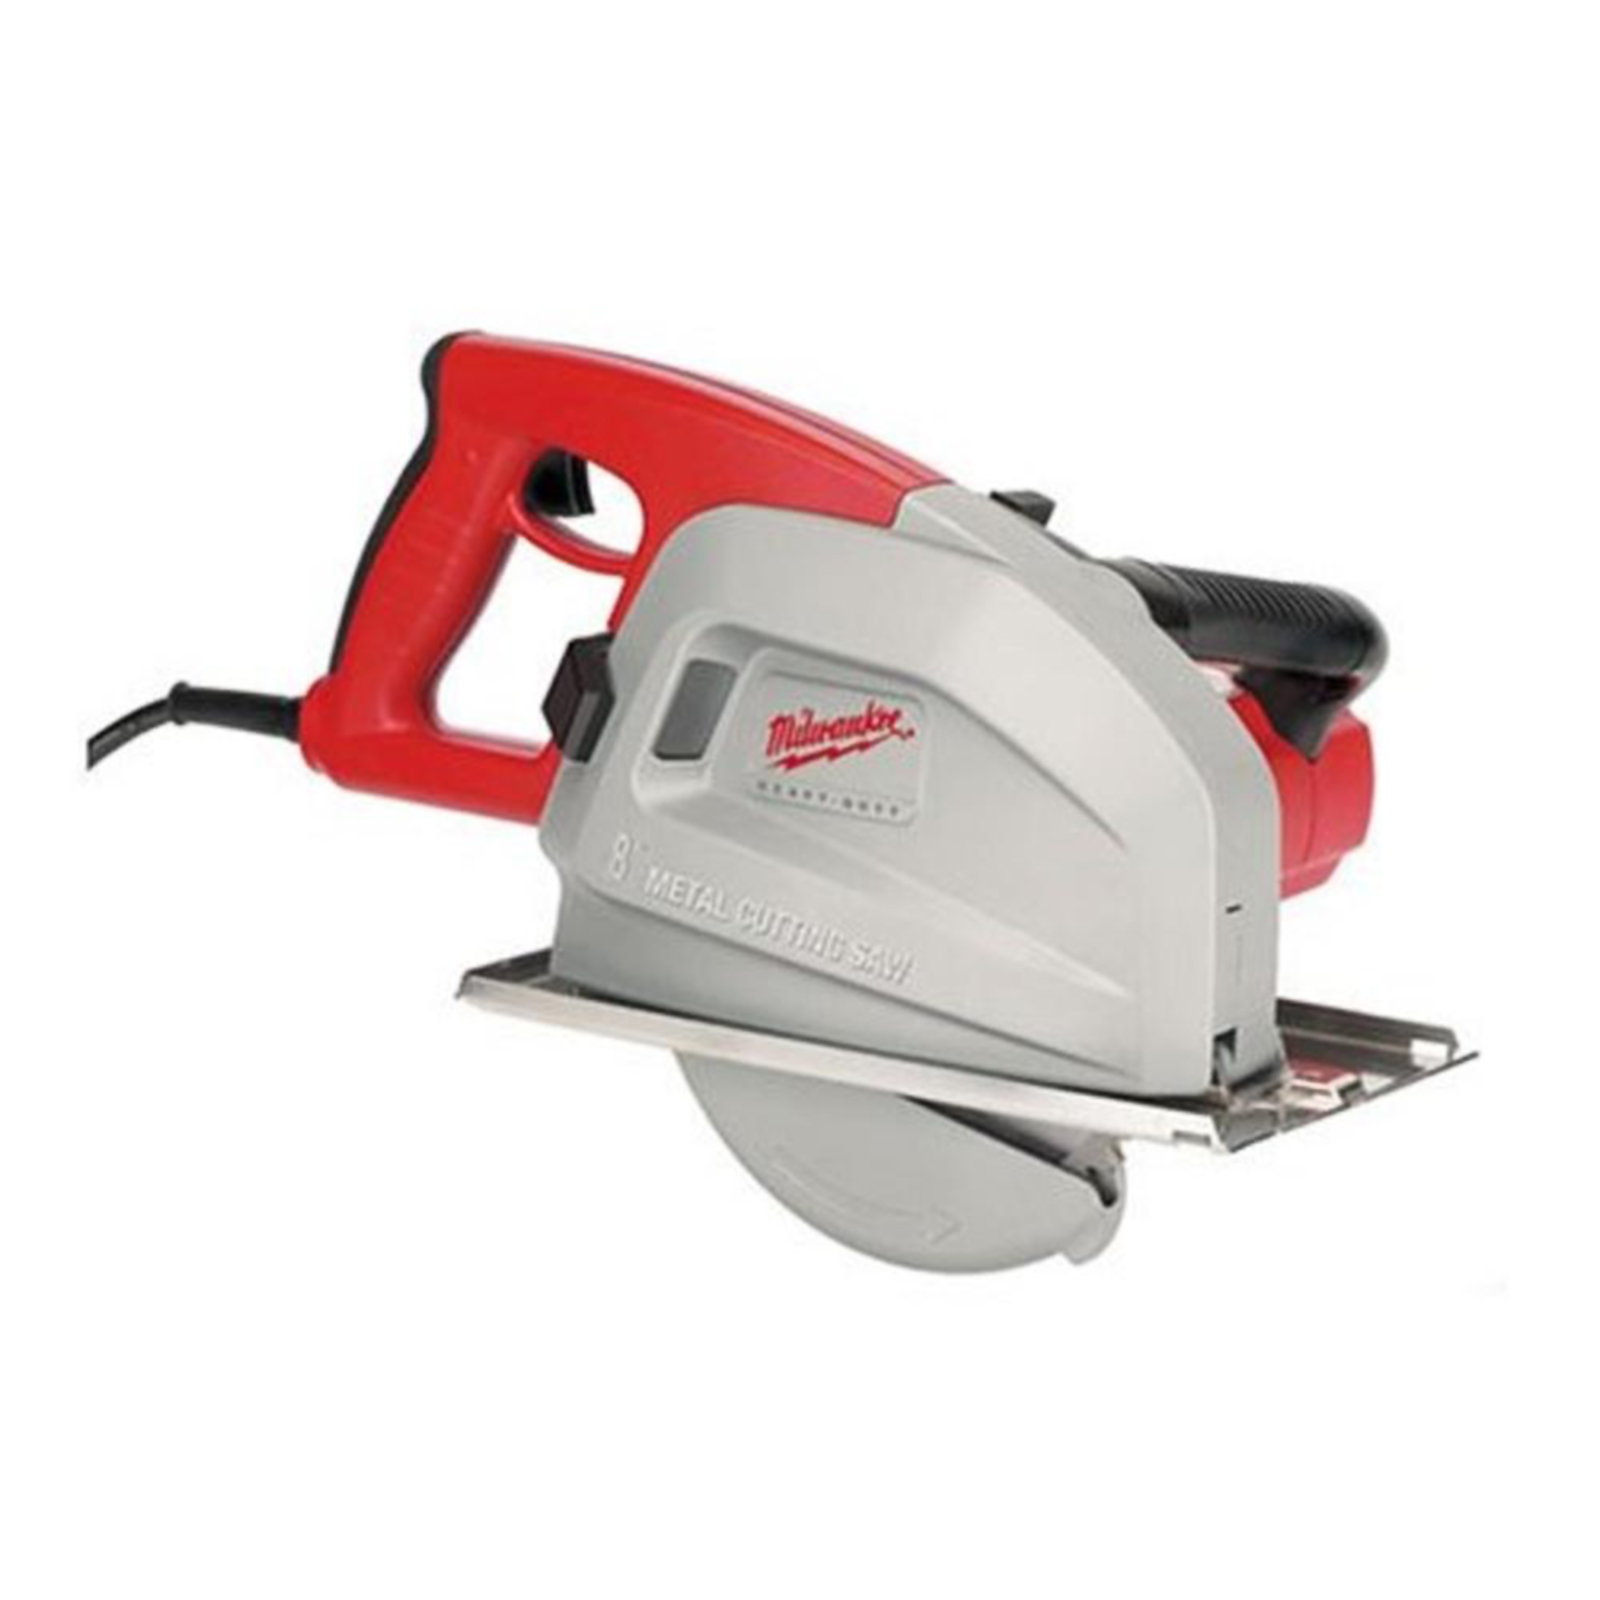 Milwaukee 6370-20 8" 13A Metal Cutting Circular Saw with Right Blade Position